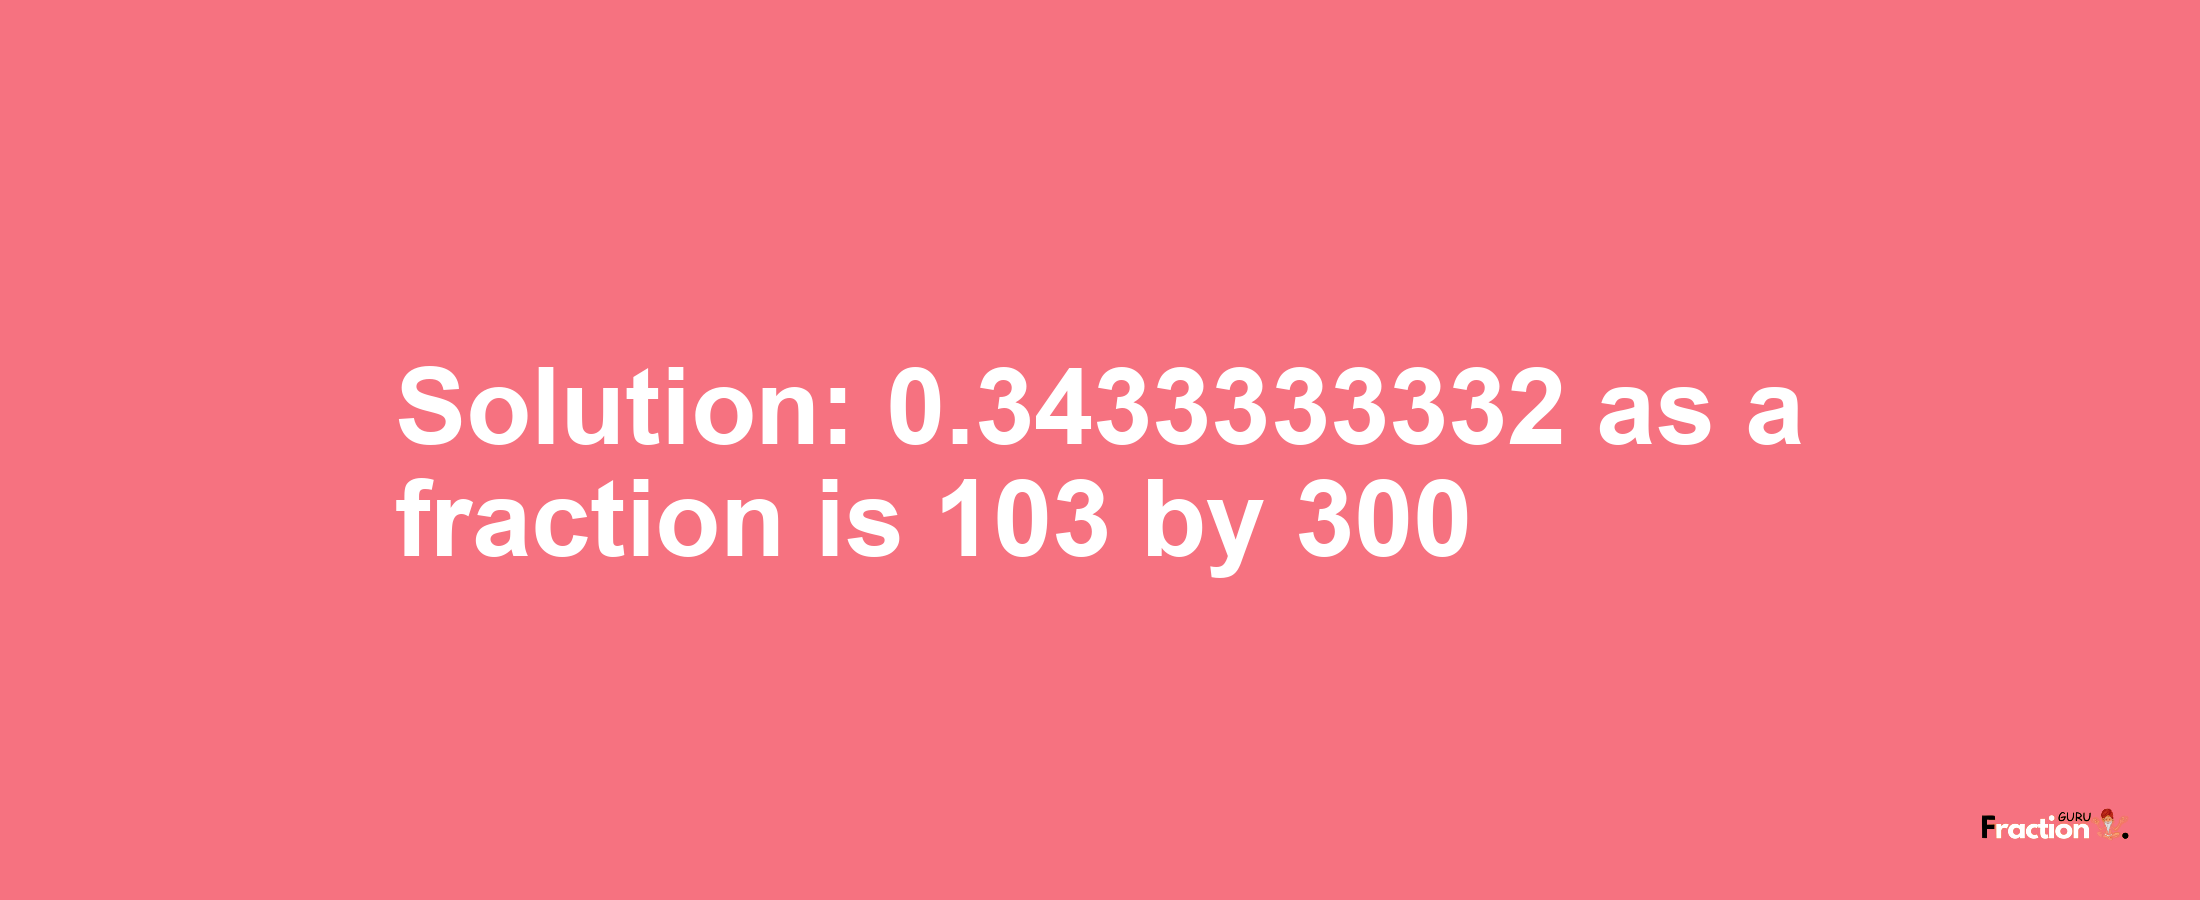 Solution:0.3433333332 as a fraction is 103/300